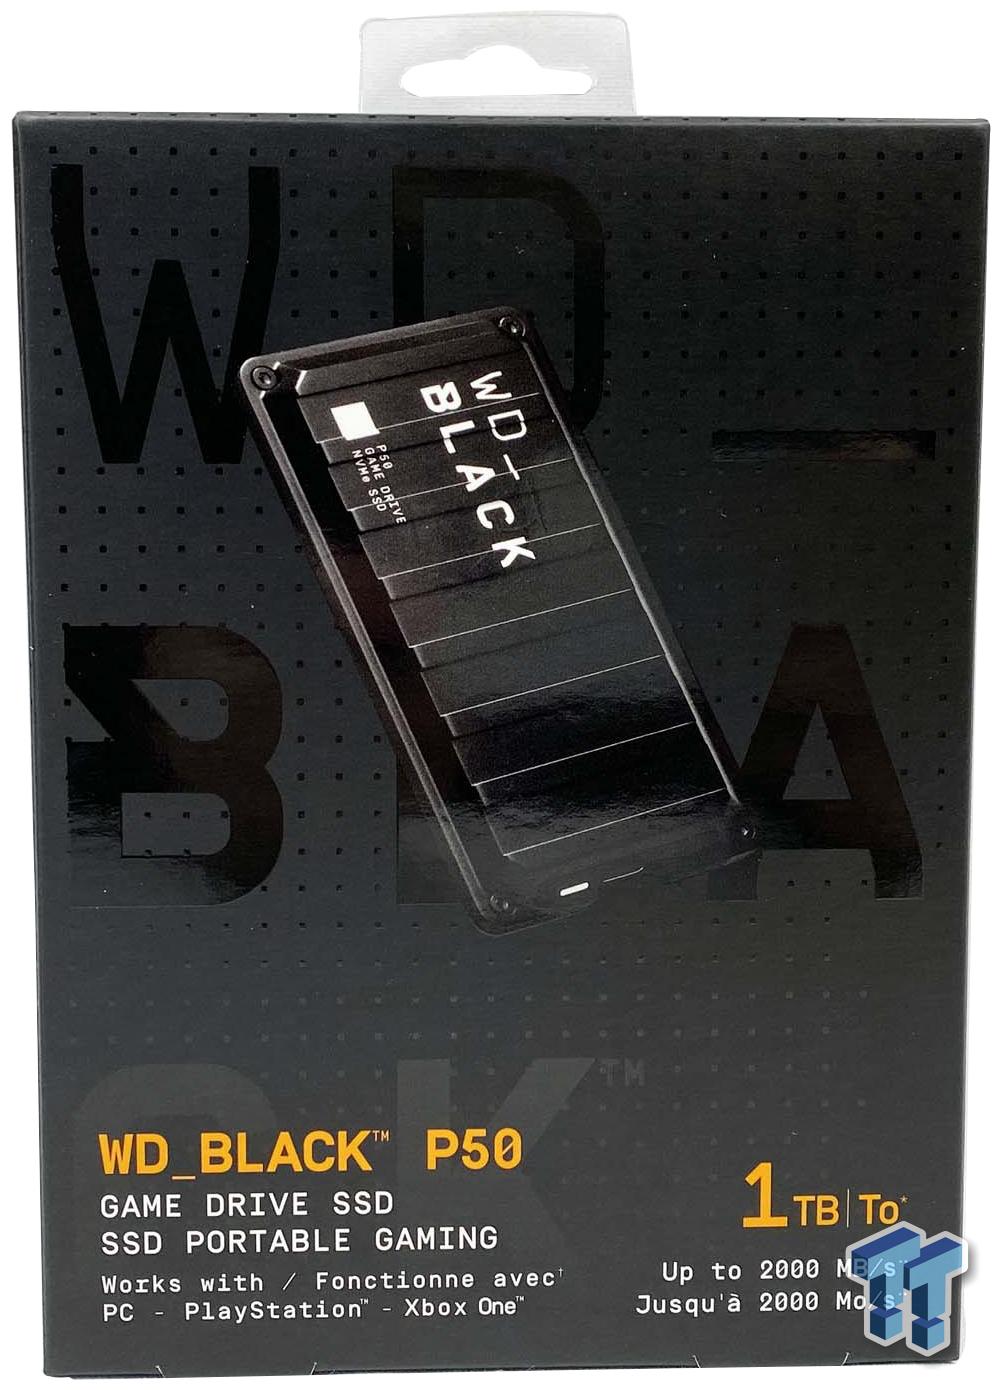 Understand And Buy Wd Black 1tb P50 Game Drive Ssd Cheap Online